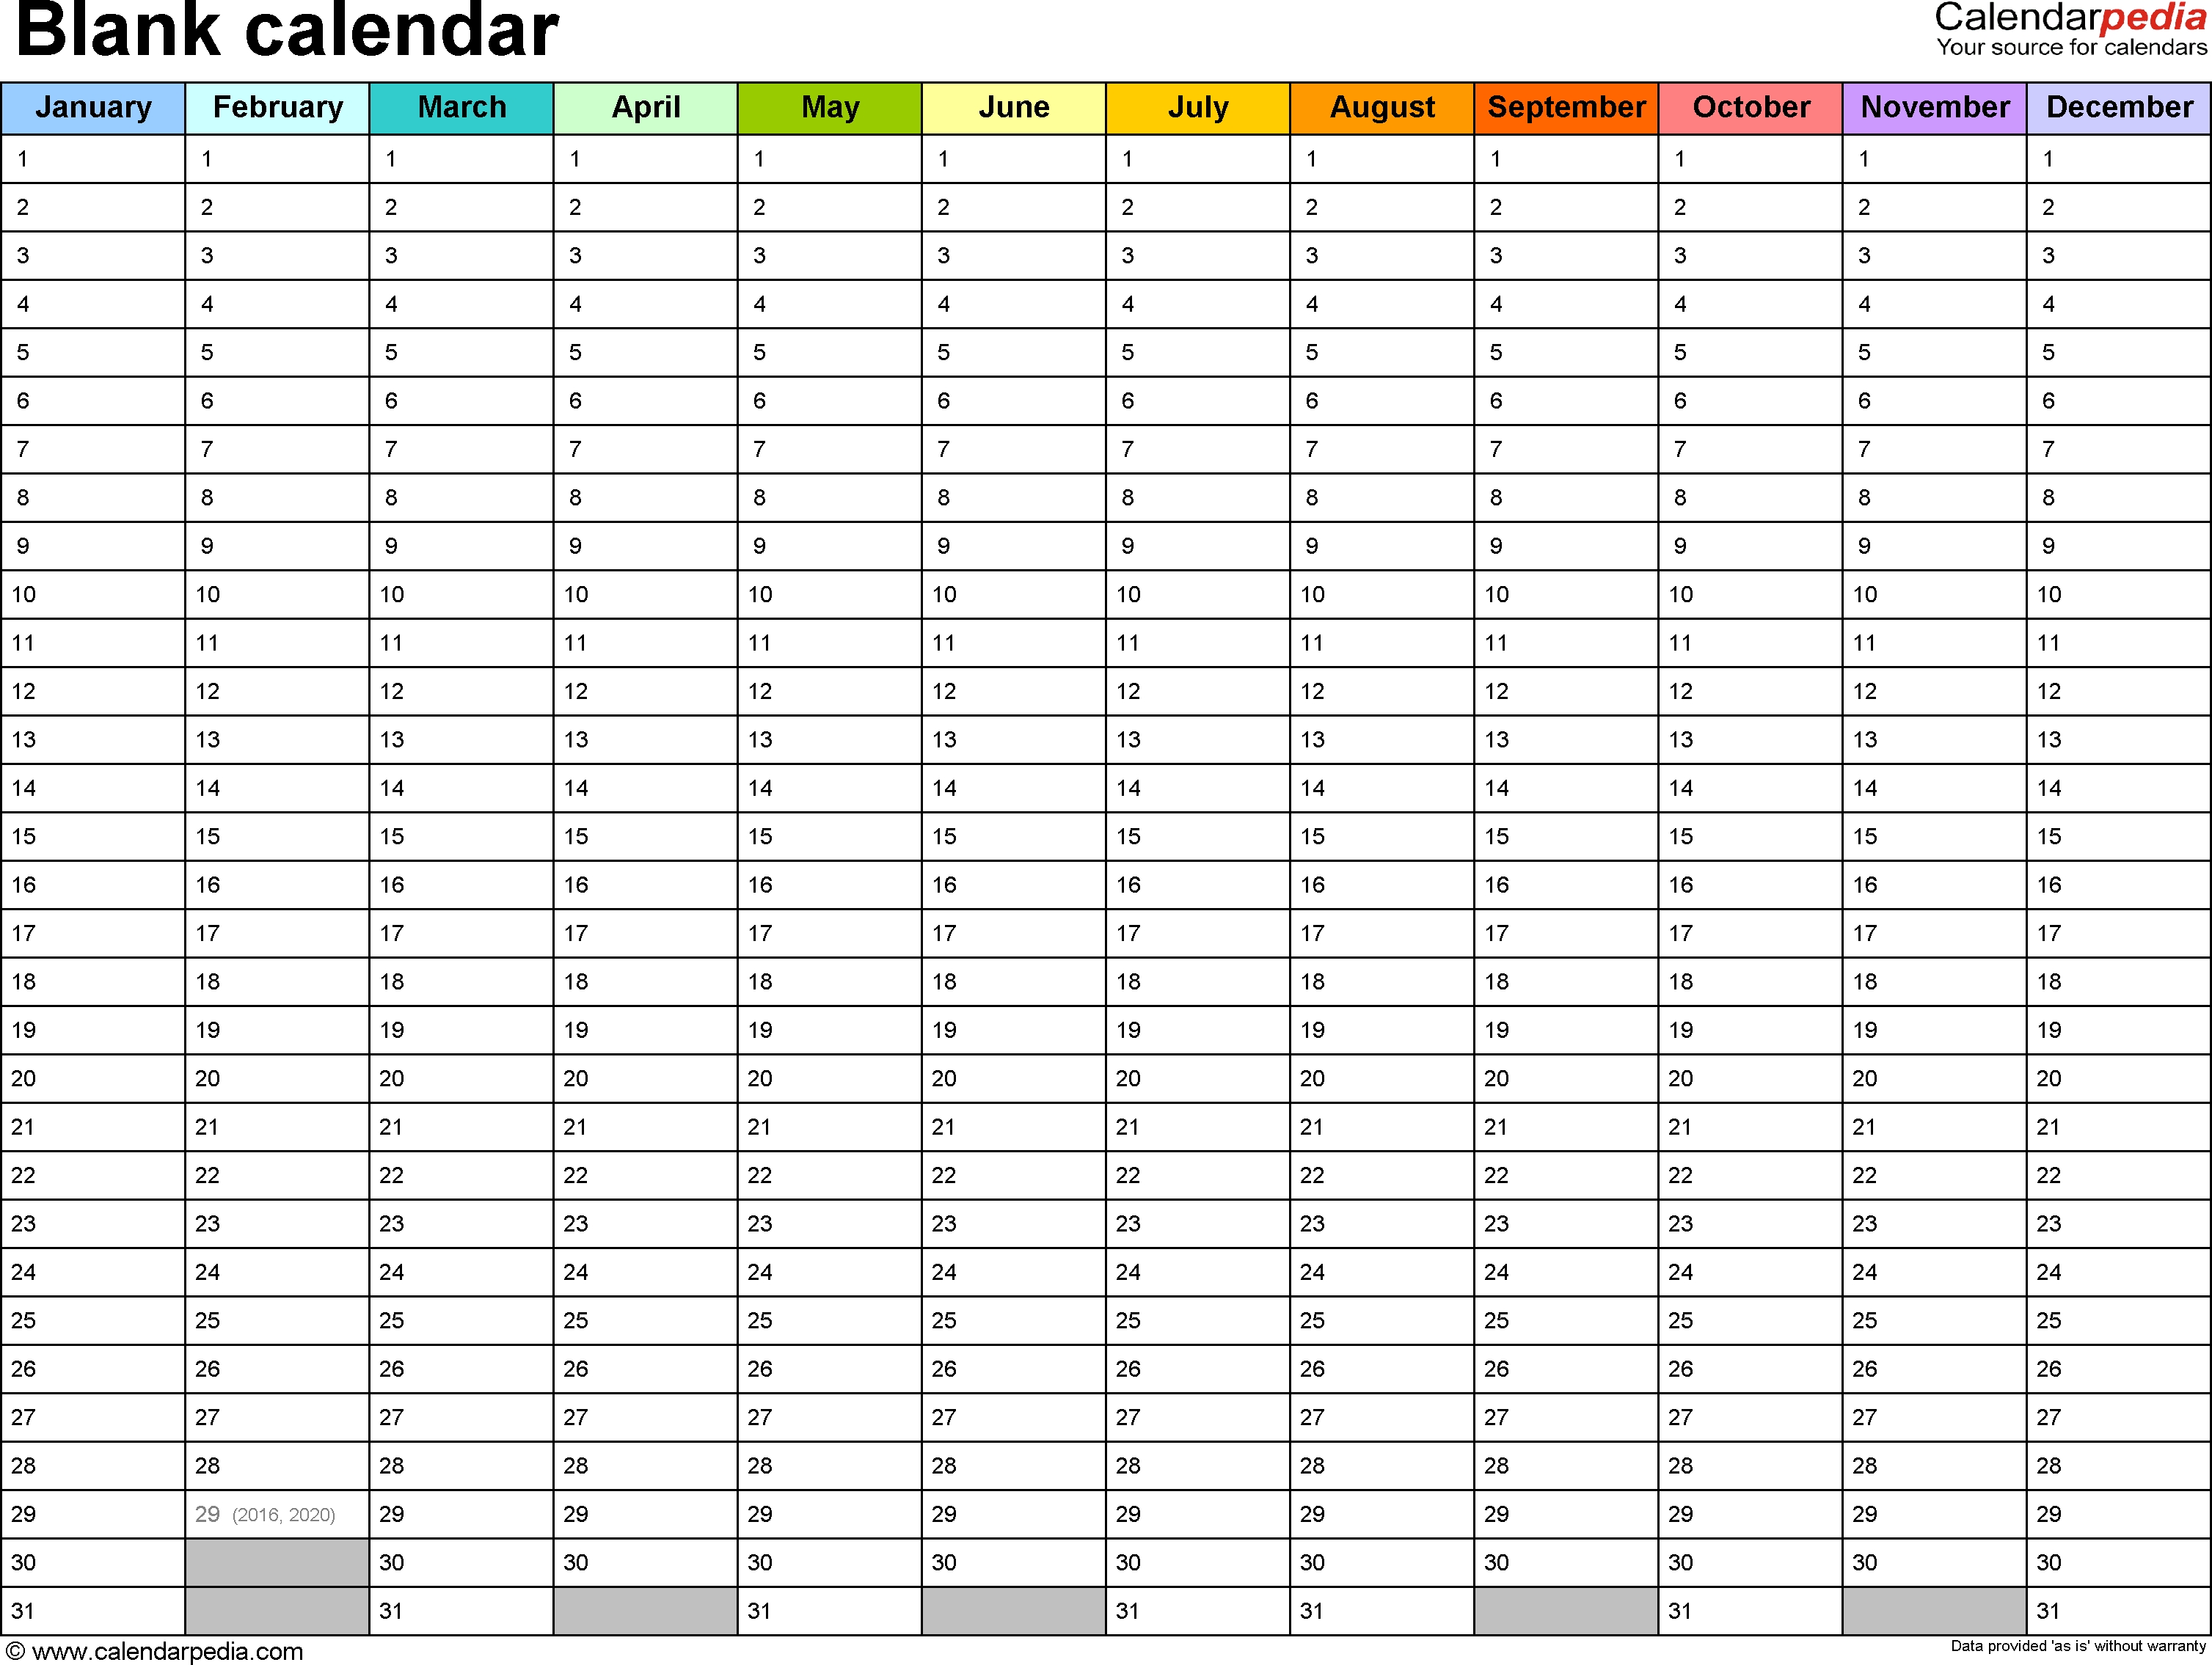 Blank Calendar - 9 Free Printable Pdf Templates pertaining to Pdf Blank Calendar Without Months